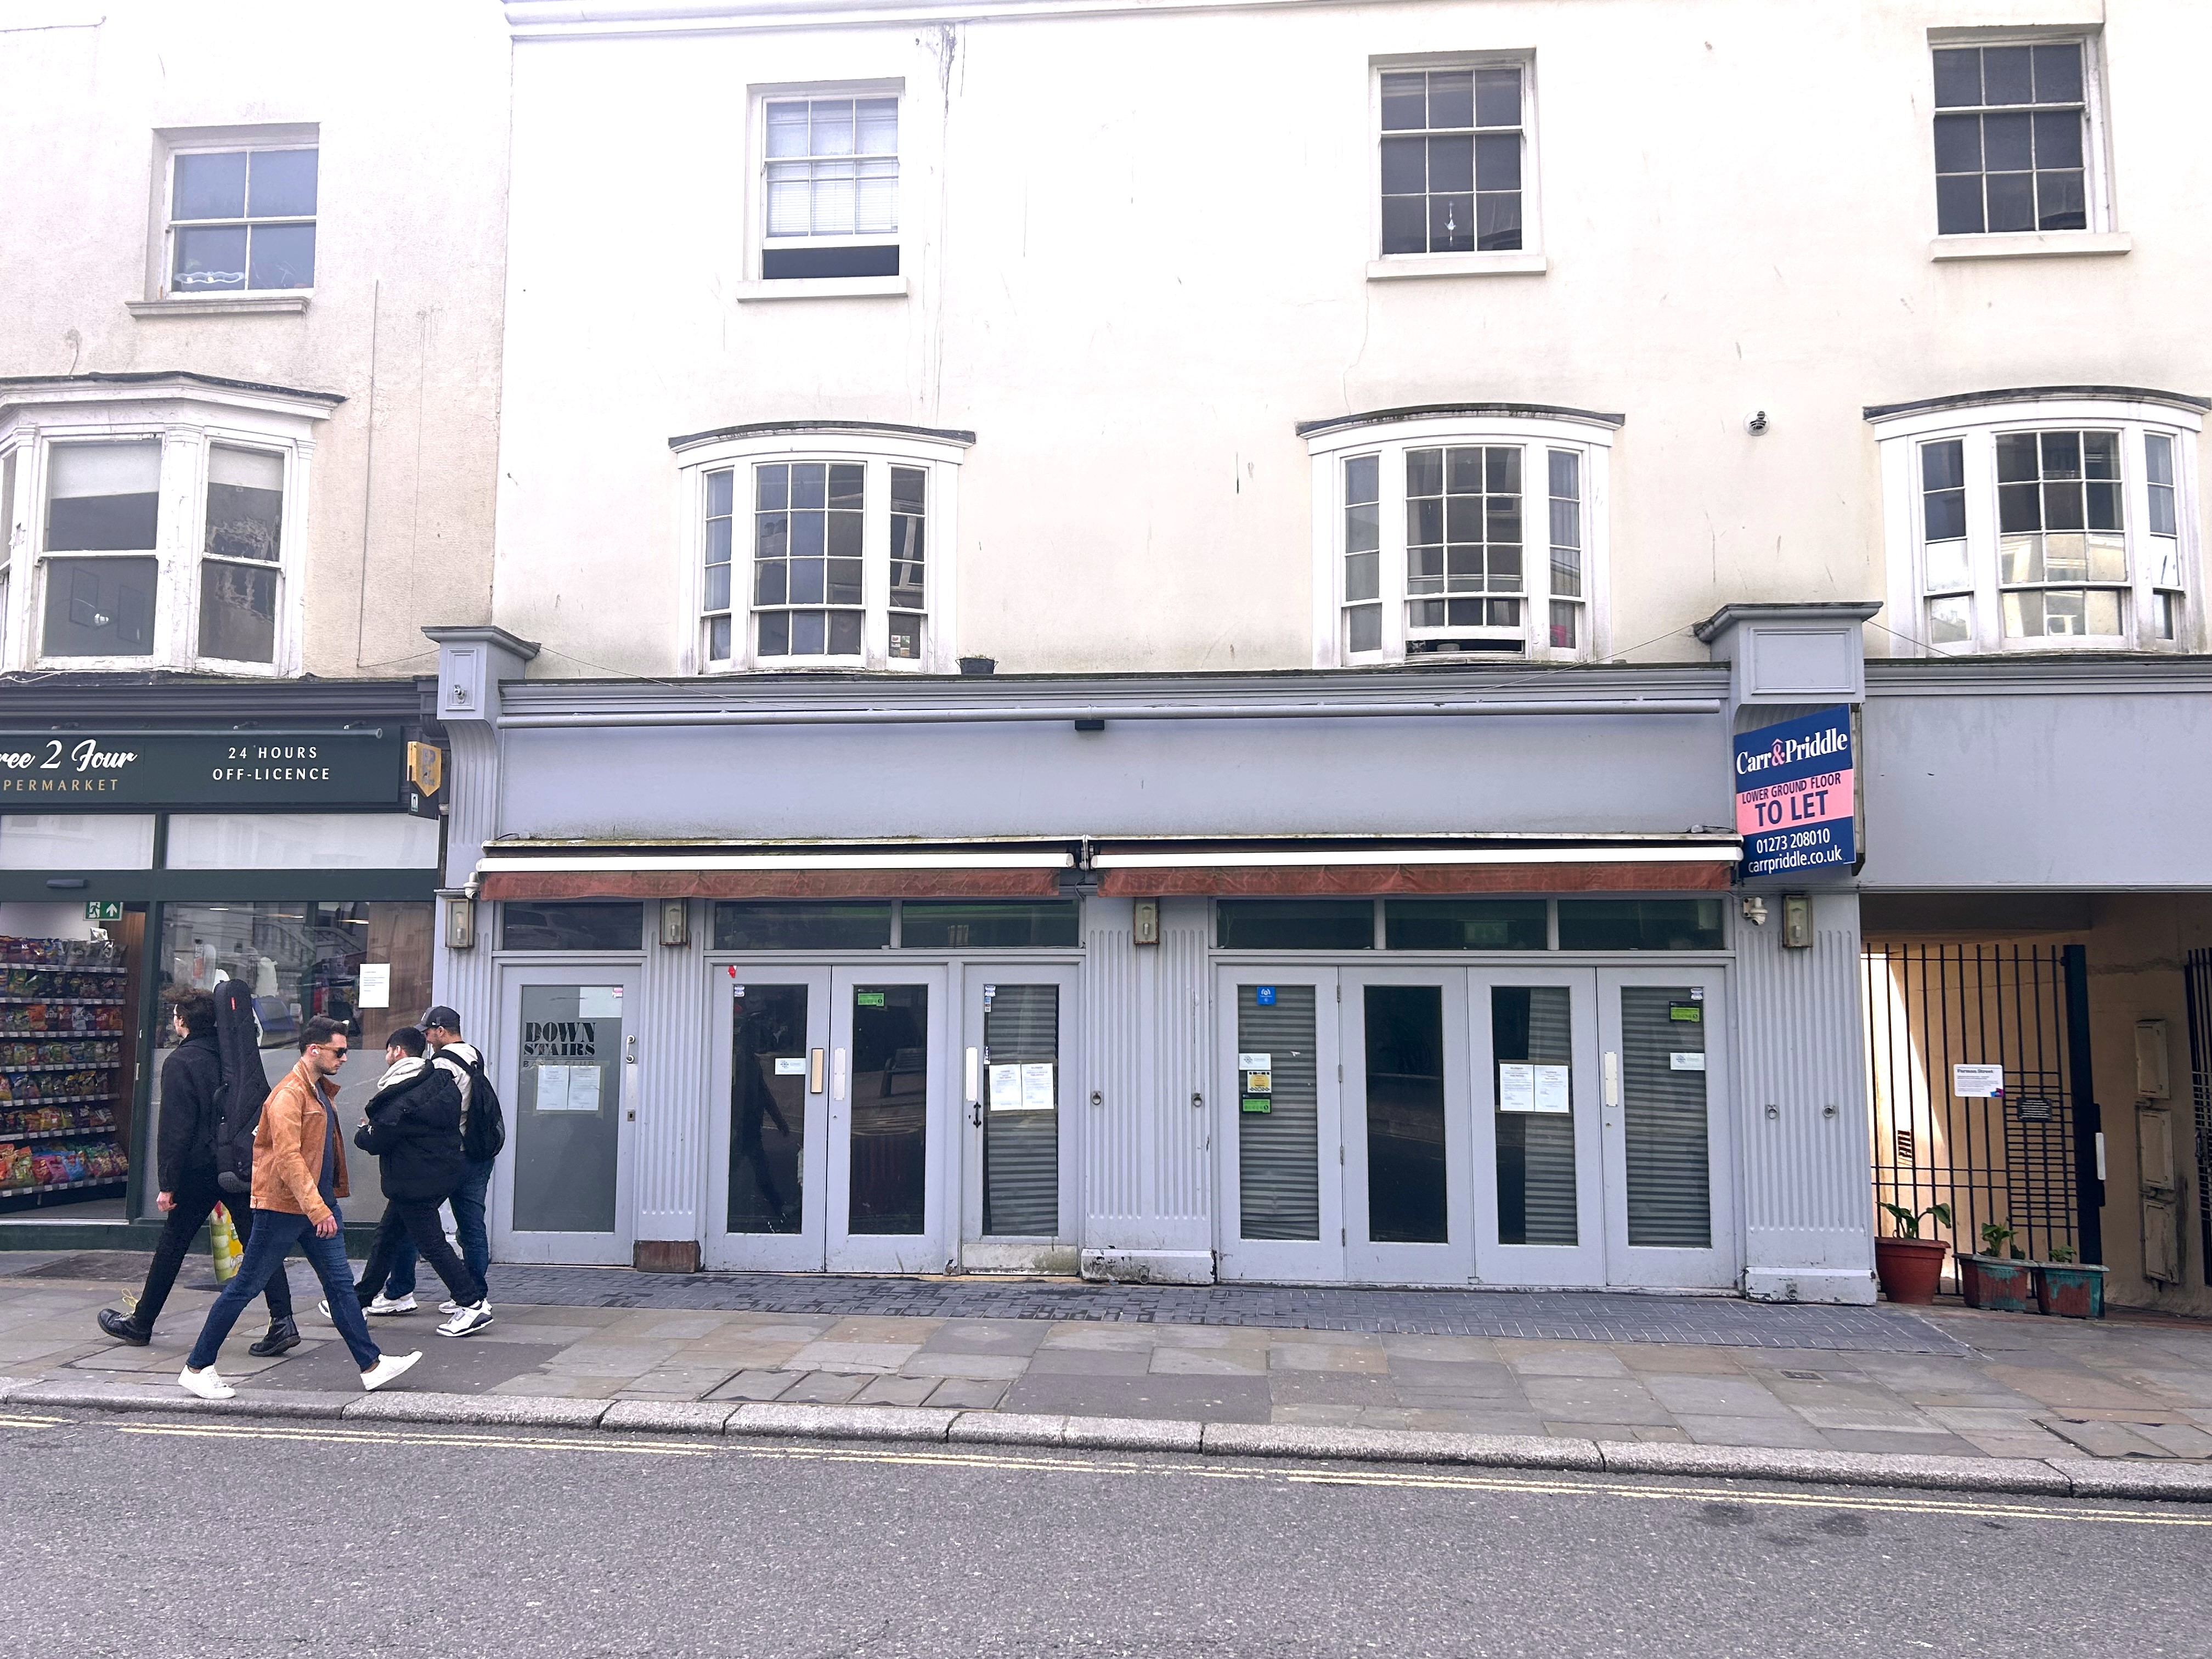 0 bed Retail Property (High Street) for rent in Hove. From PS&B - Carr & Priddle - Brighton